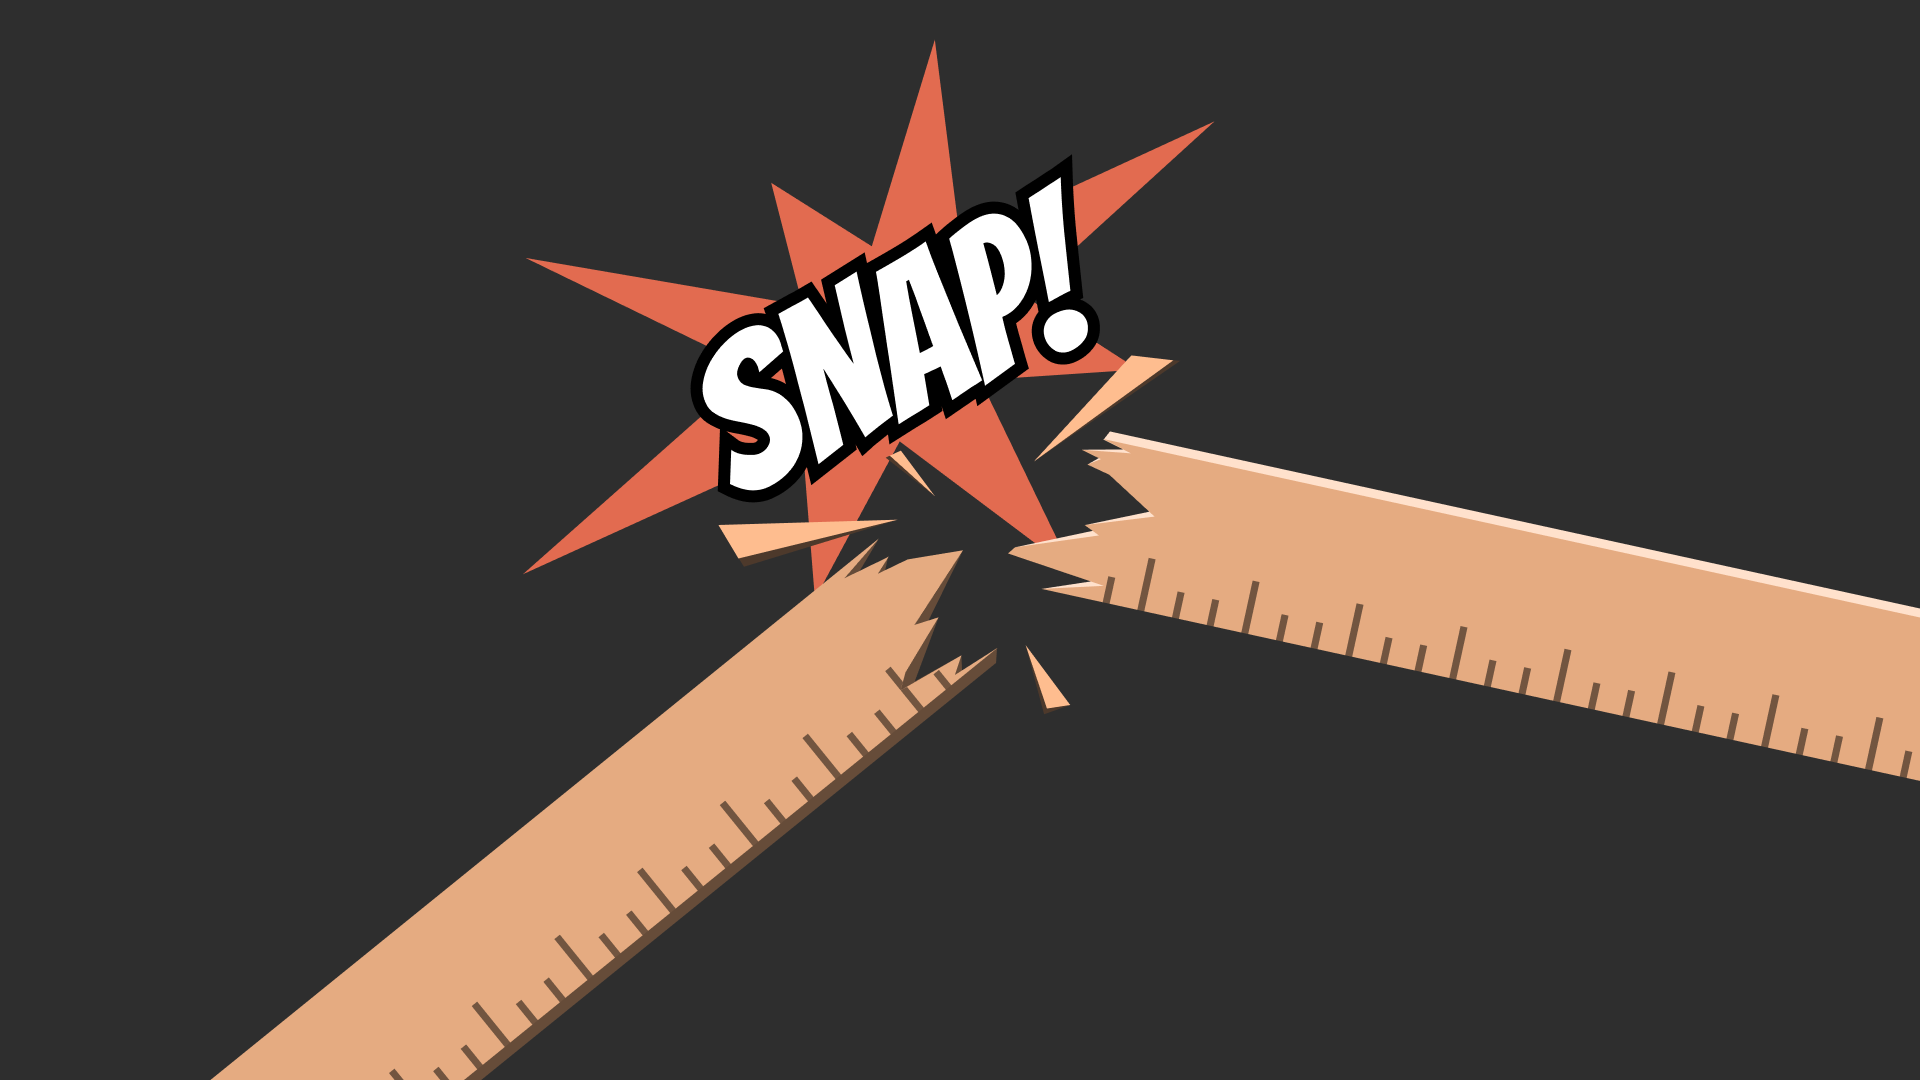 Comic-book style illustration of a ruler being snapped.